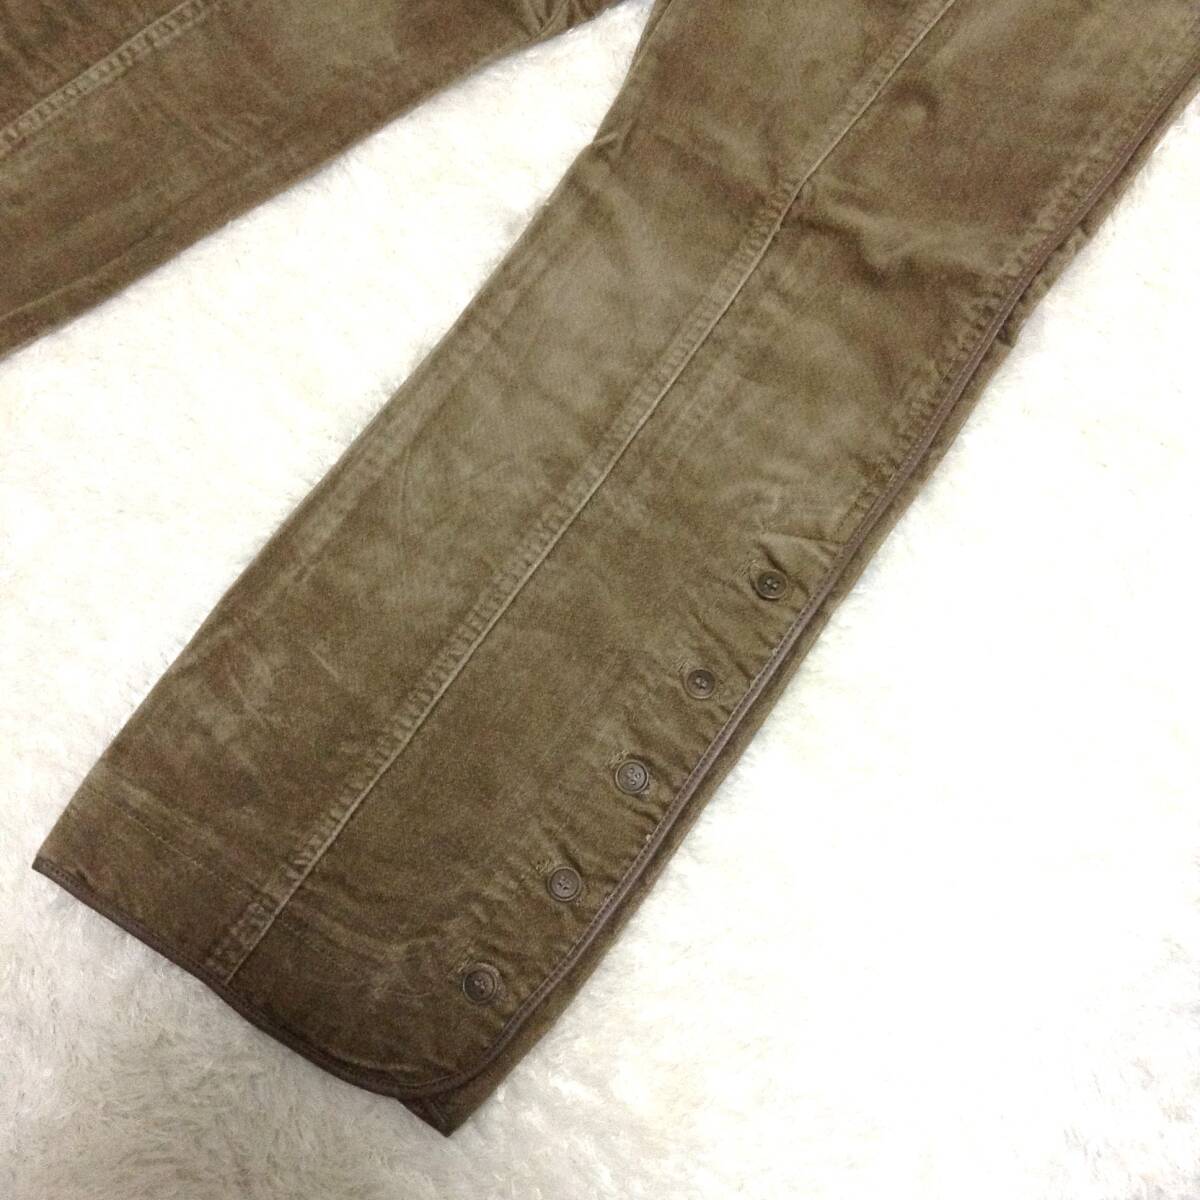  cropped pants lady's M size new goods unused Brown anonymity delivery 